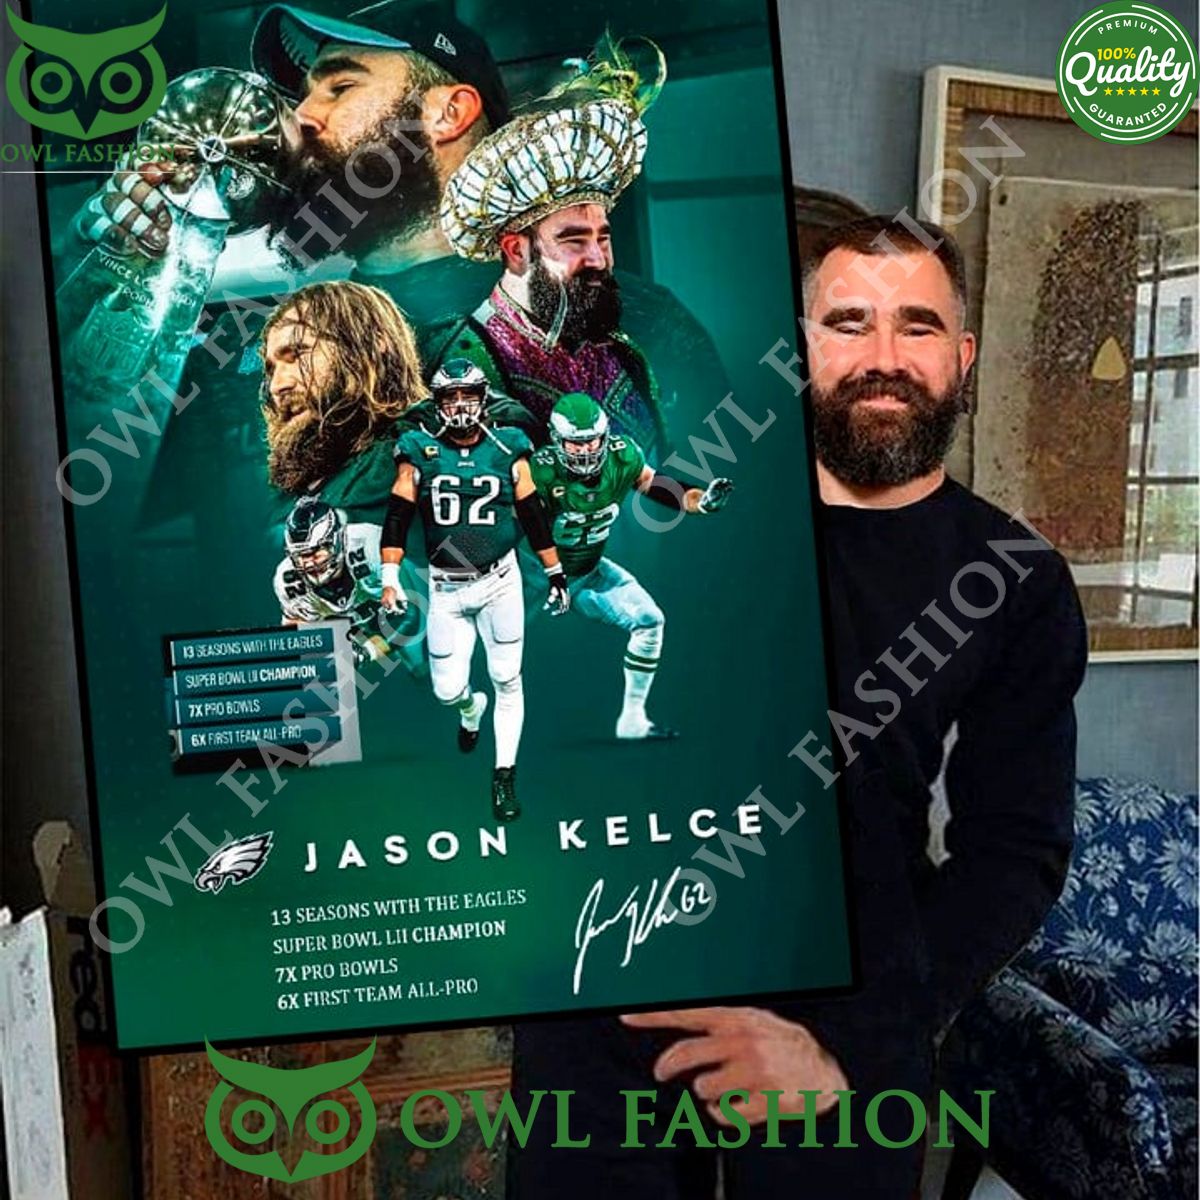 Thank you for memories Jason Kelce 13 seasons with the Eagles 7x Pro Bowls Legender poster